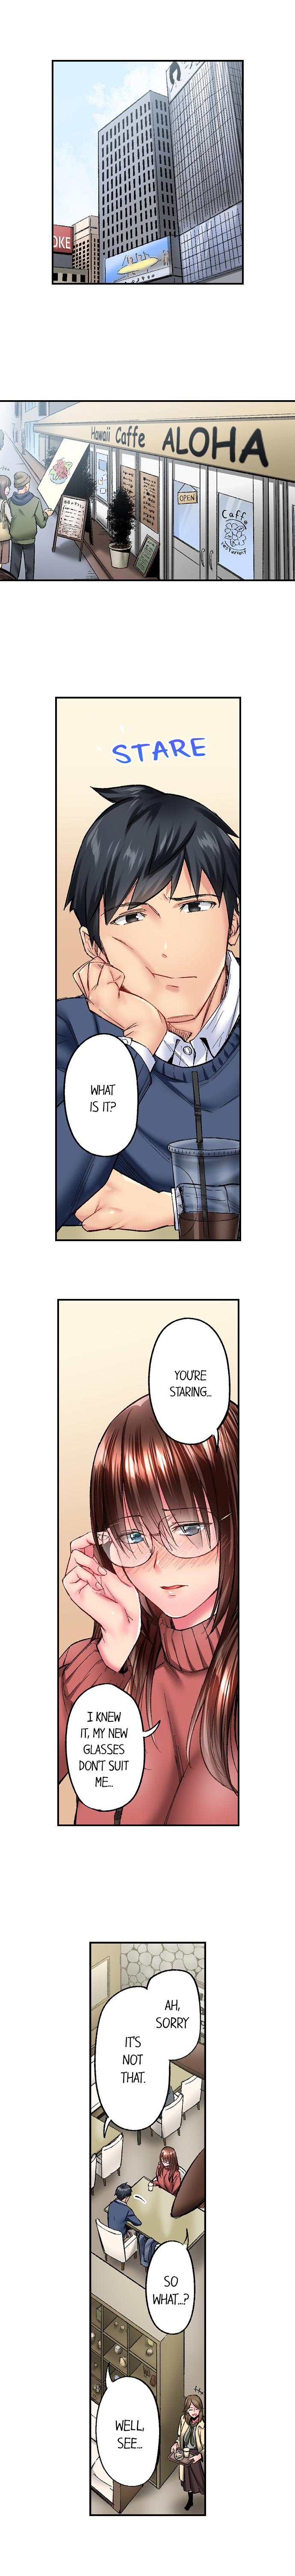 simple-yet-sexy-chap-34-1